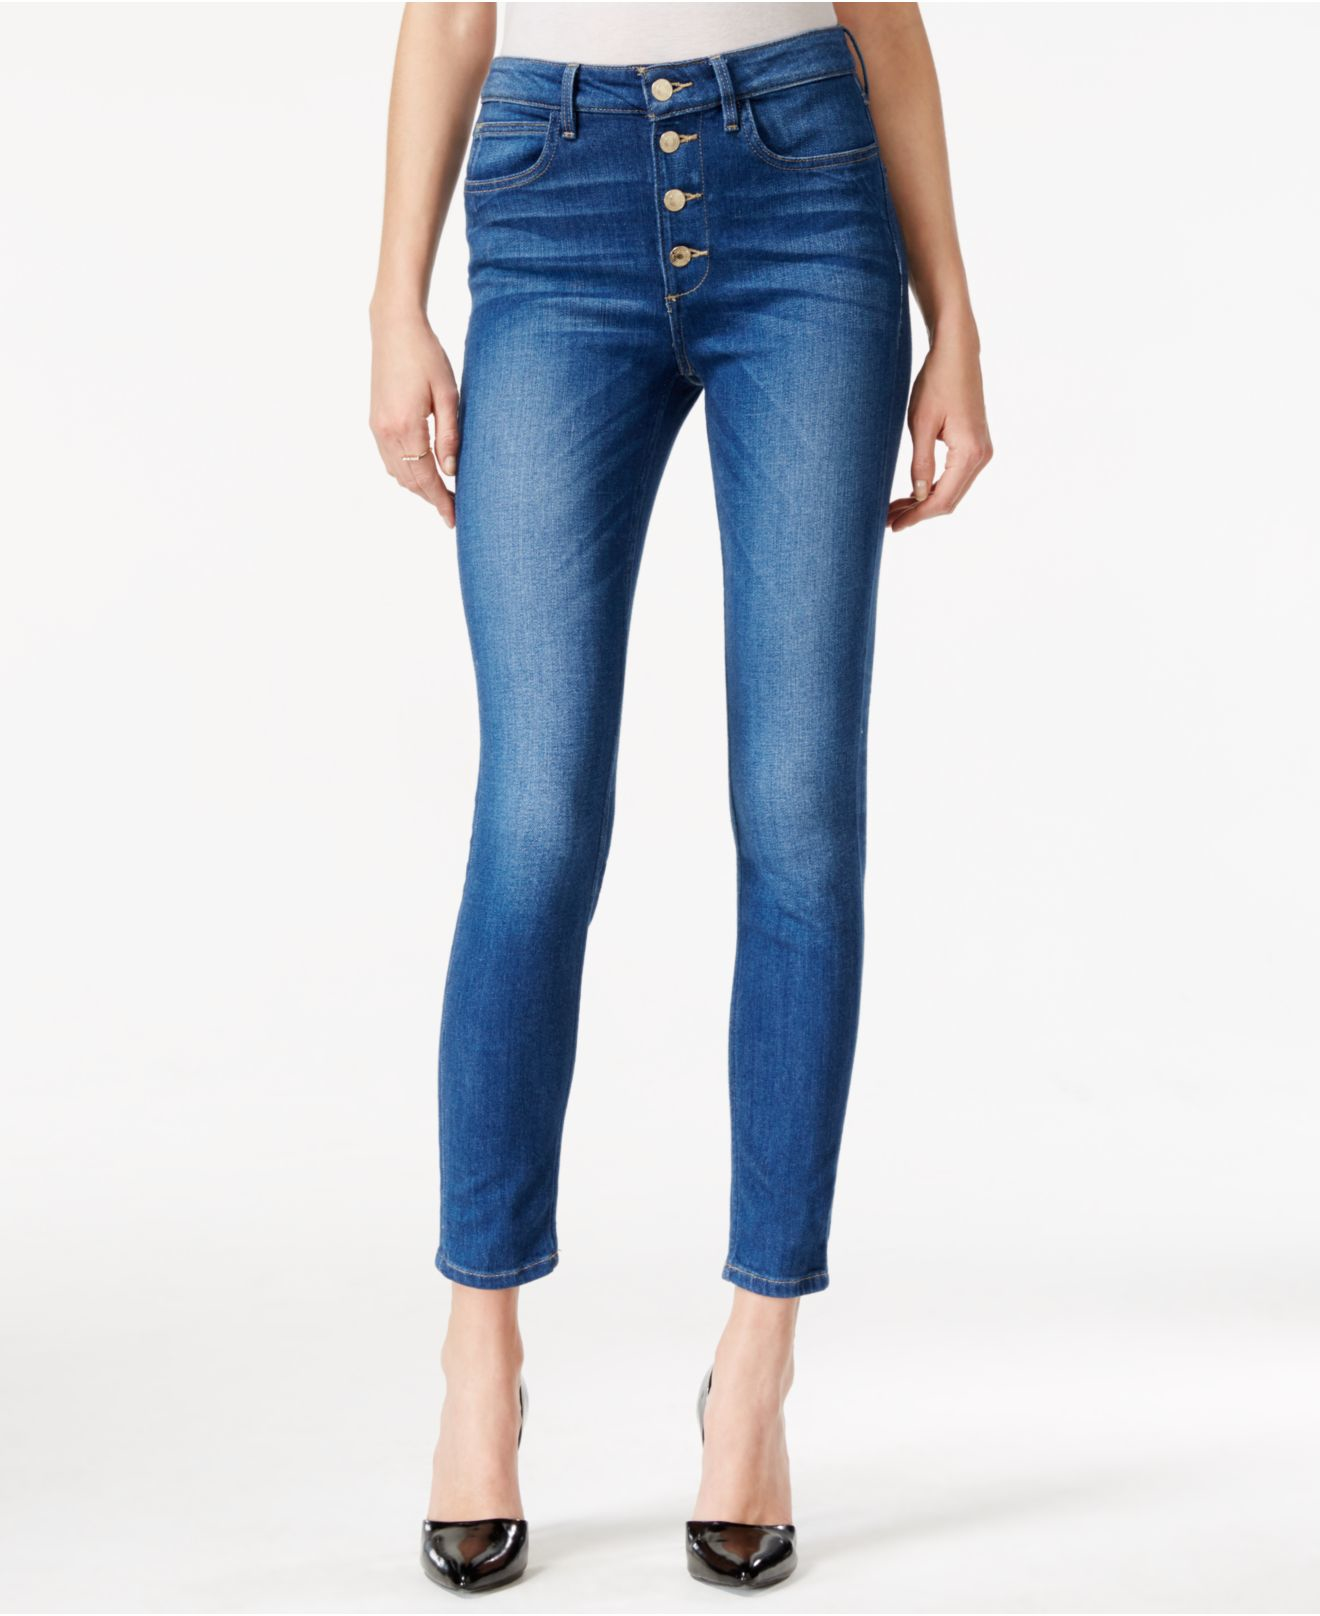 Lyst - Guess 1981 High-rise Button-front Skinny Trading Post Wash Jeans